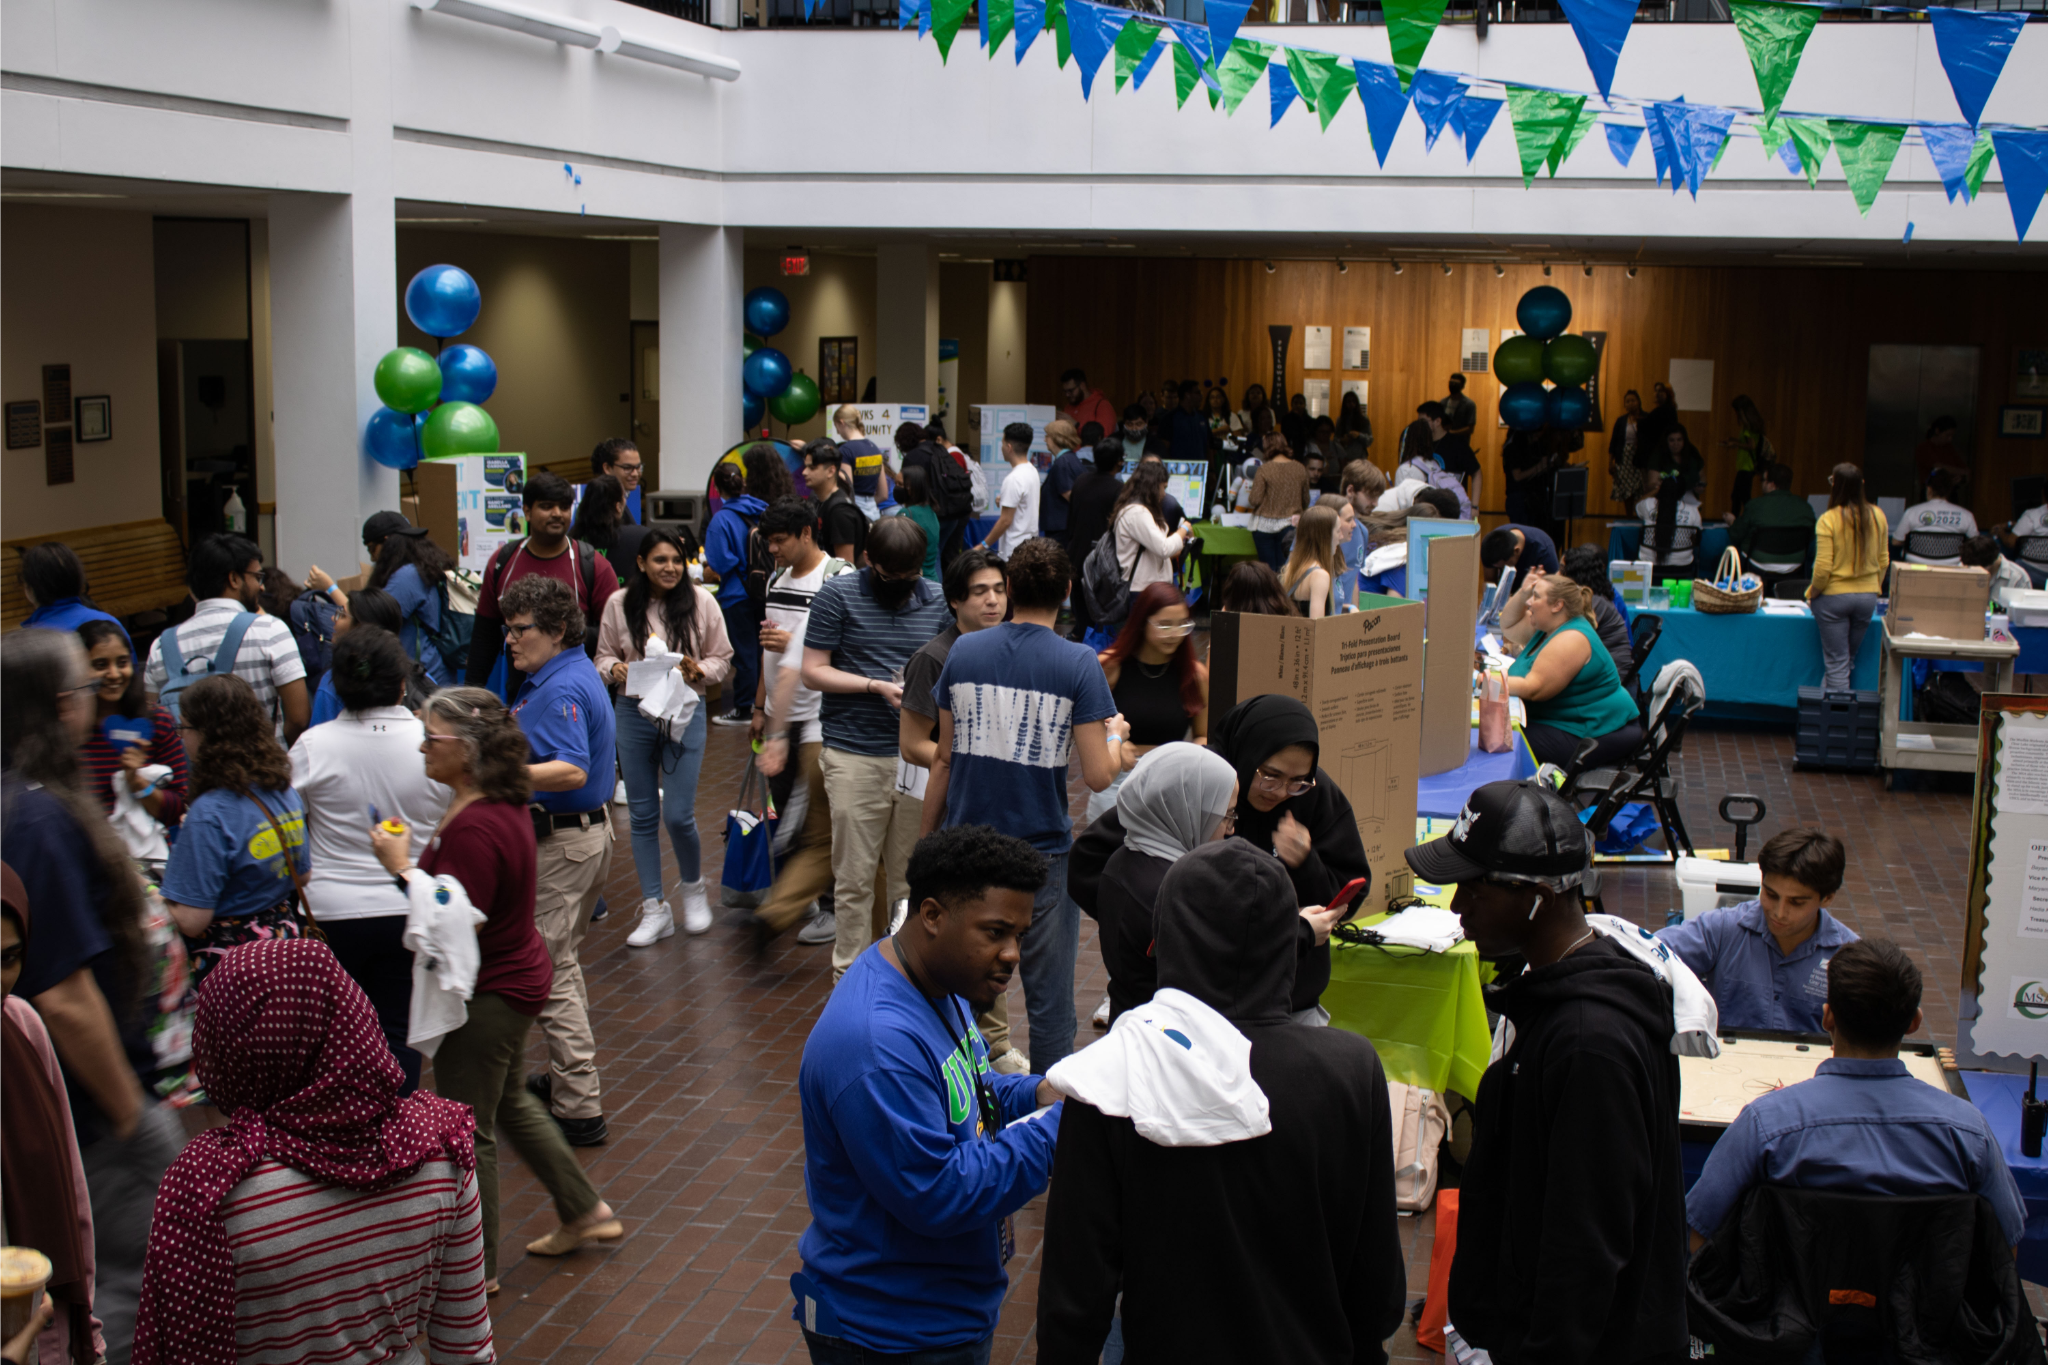 PHOTO: Image depicts people at I Heart UHCL Week event. Photo by The Signal Executive Editor Cesar Cardenas.